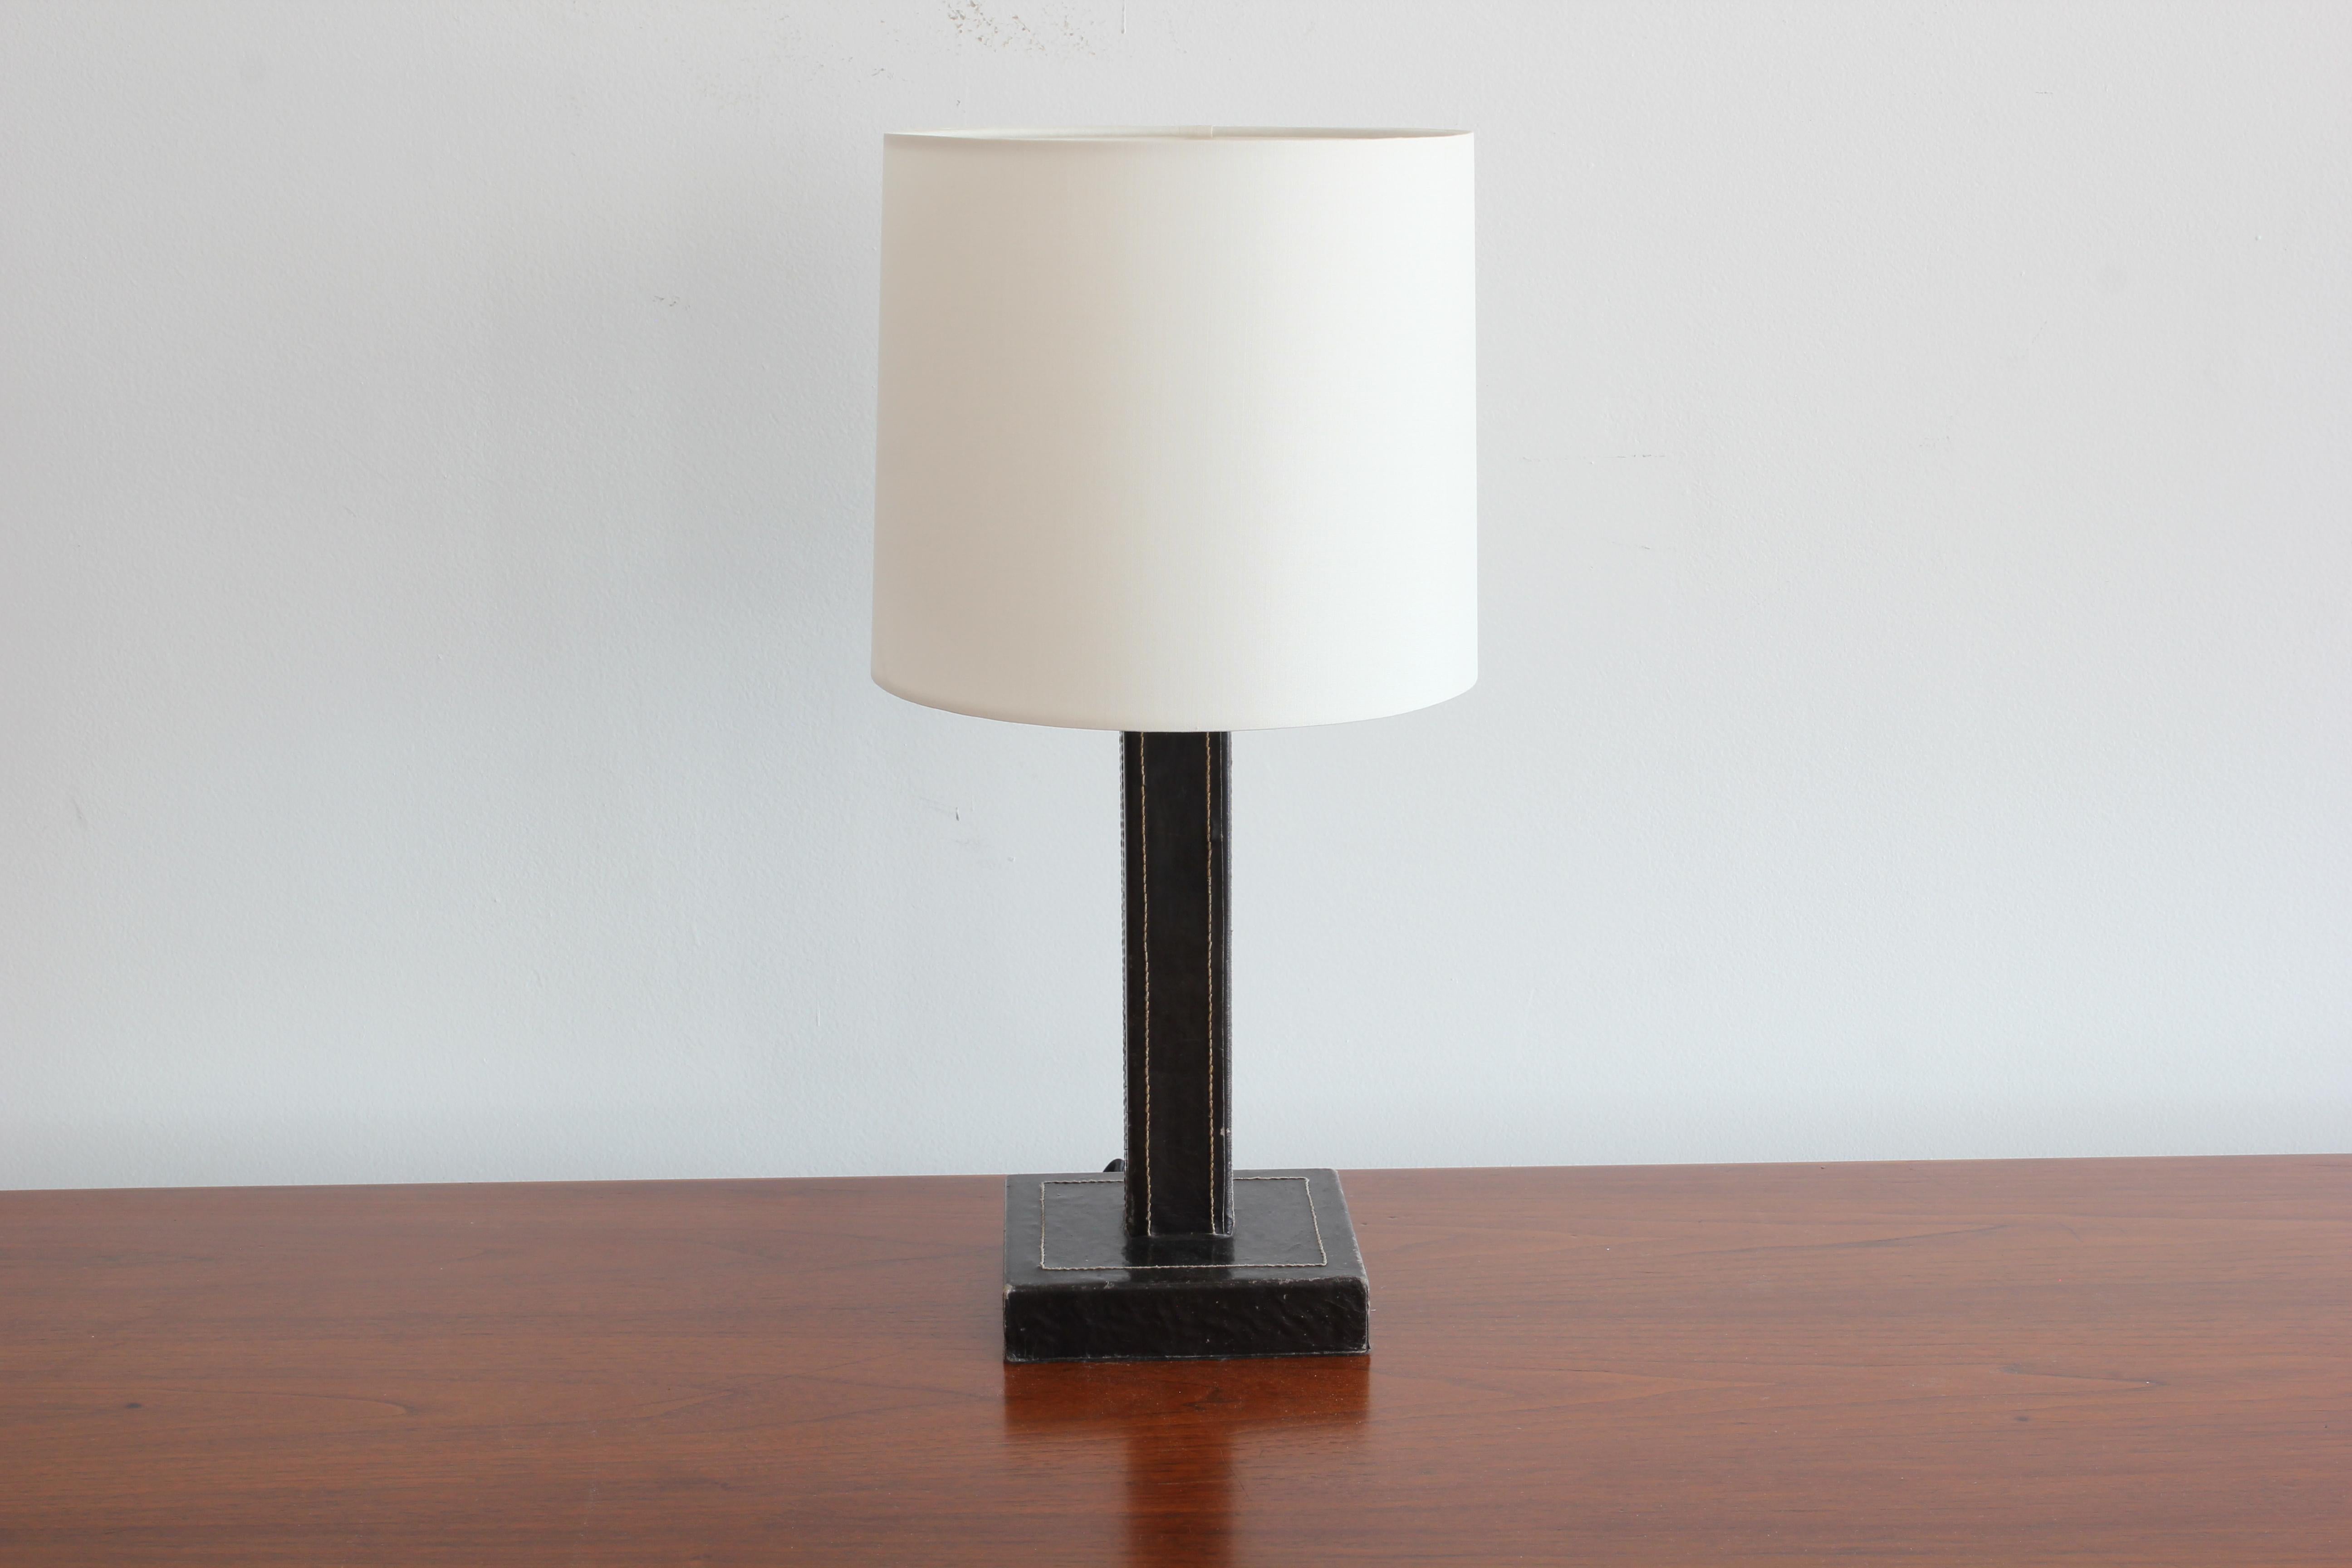 Jacques Adnet style table lamp
Black leather with contrast stitching
New shade and newly rewired.